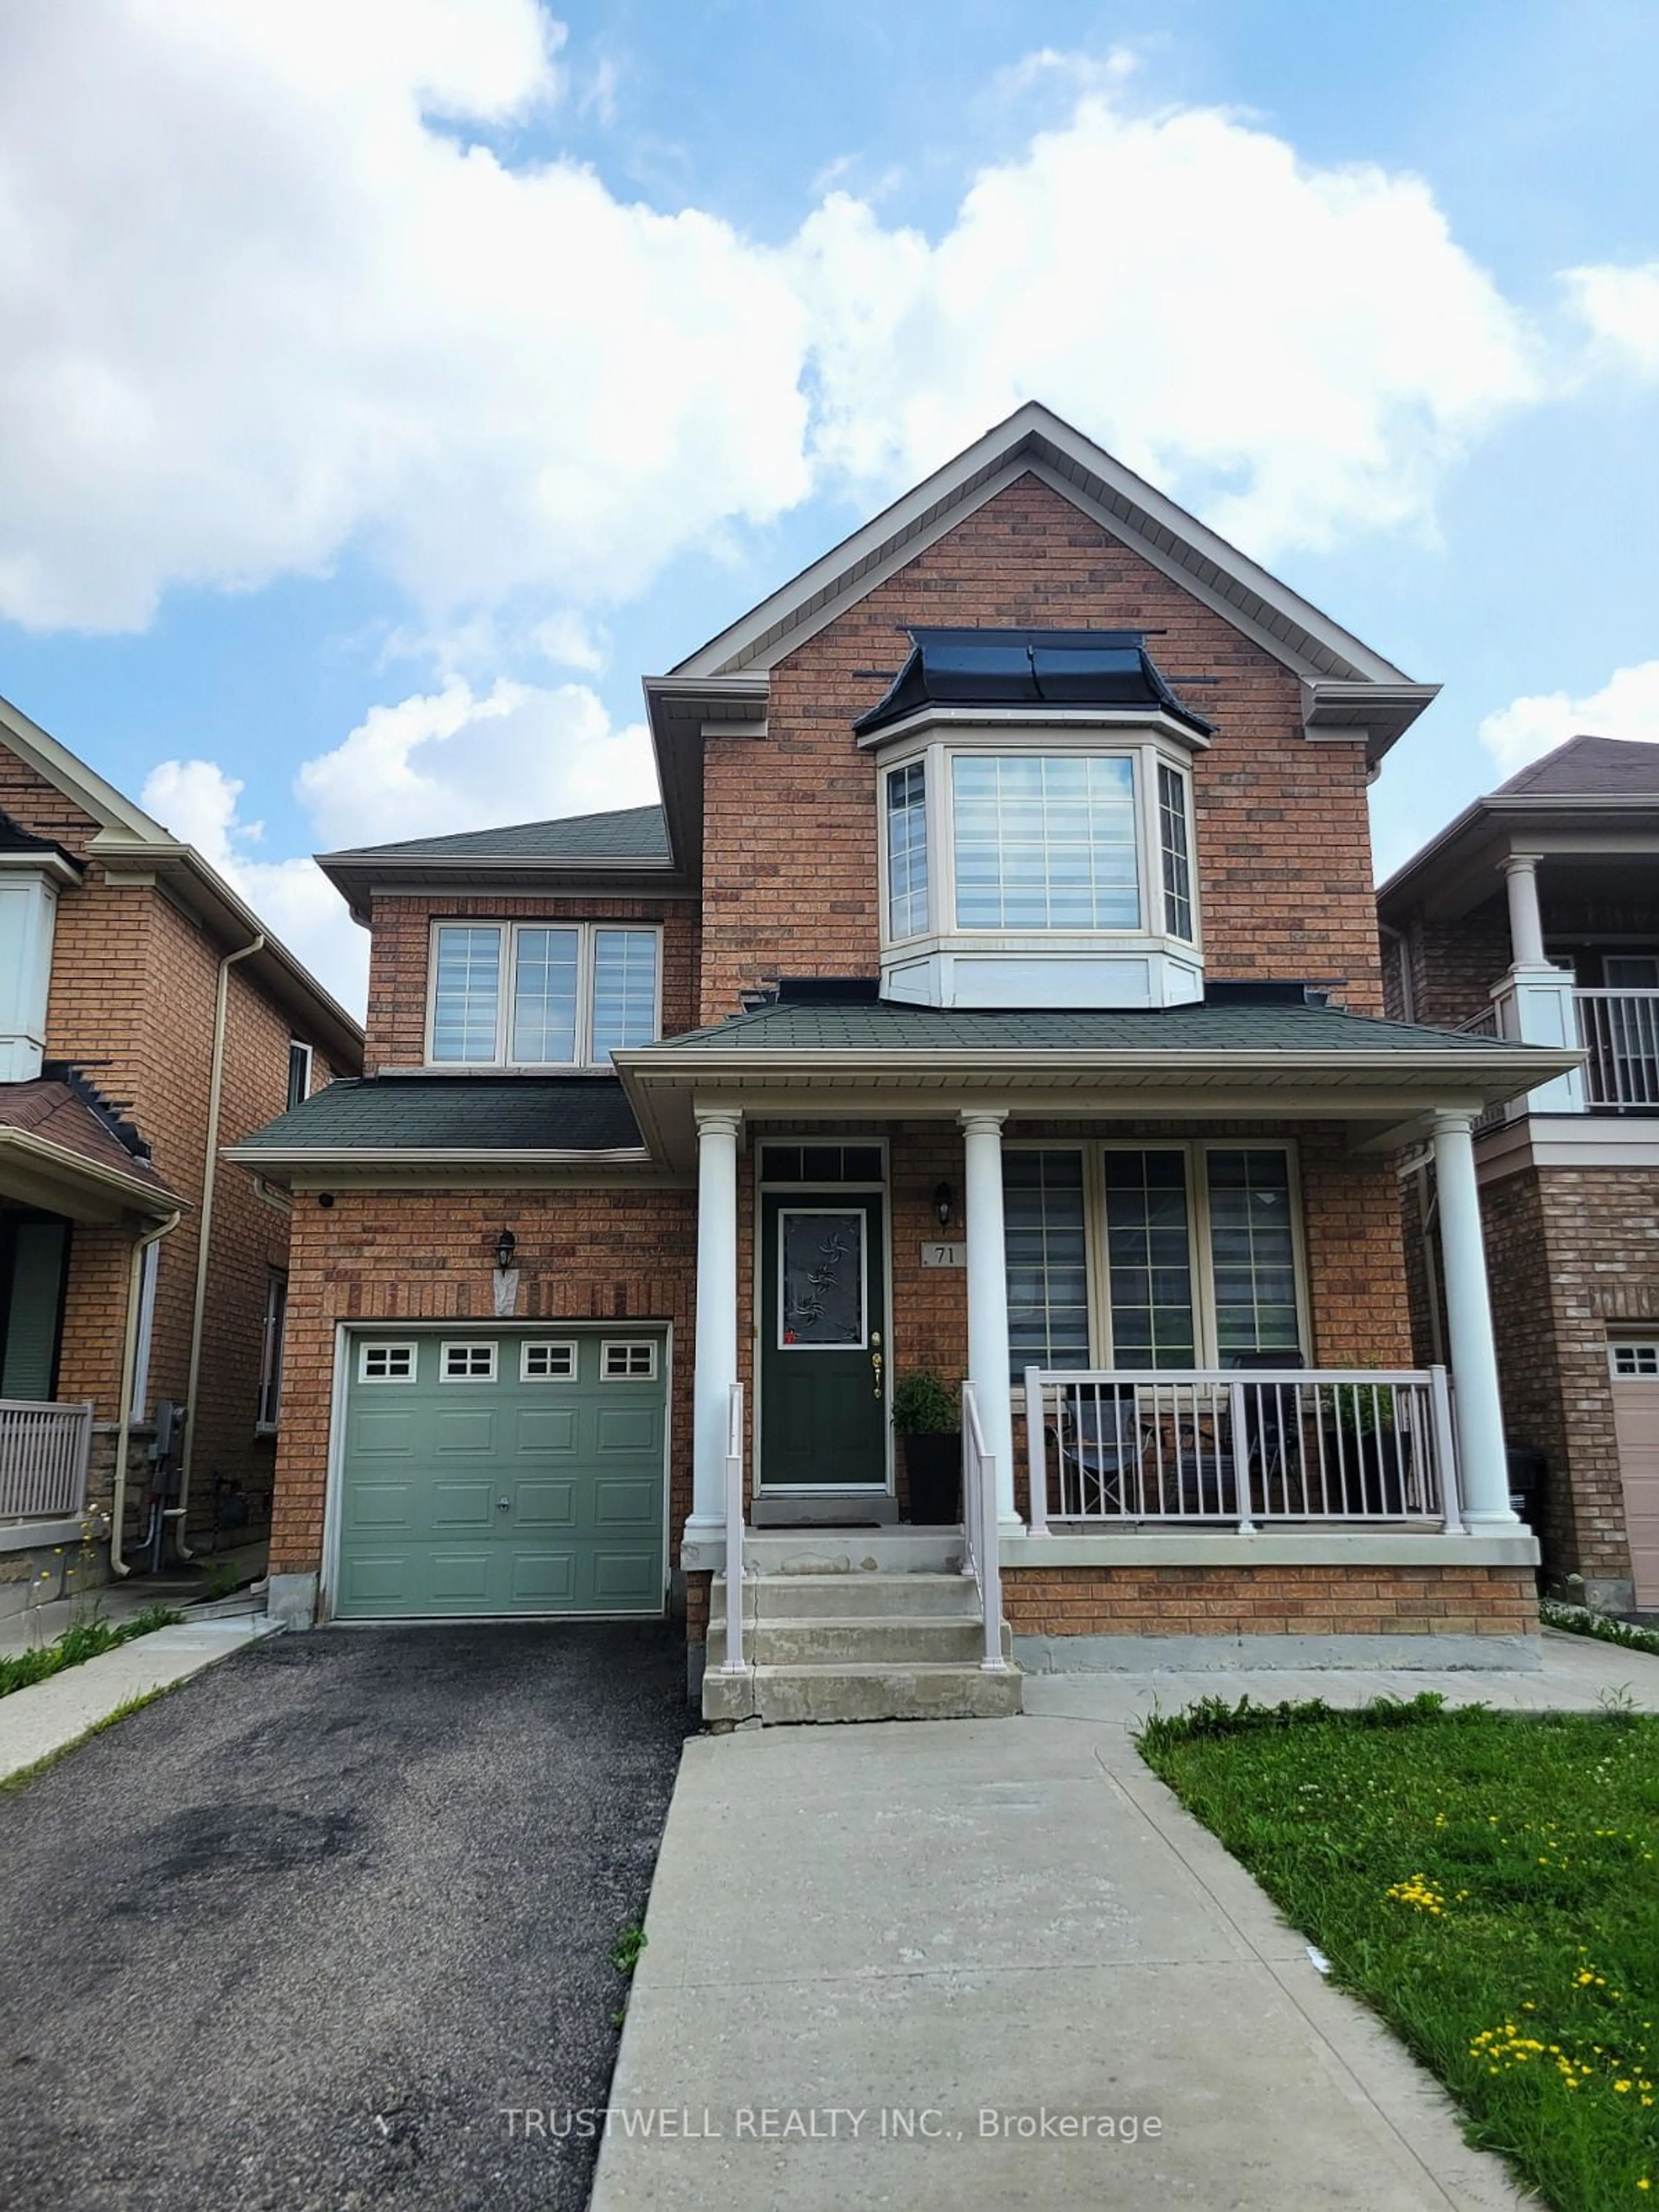 Home with brick exterior material for 71 Tomabrook Cres, Brampton Ontario L6R 0V5